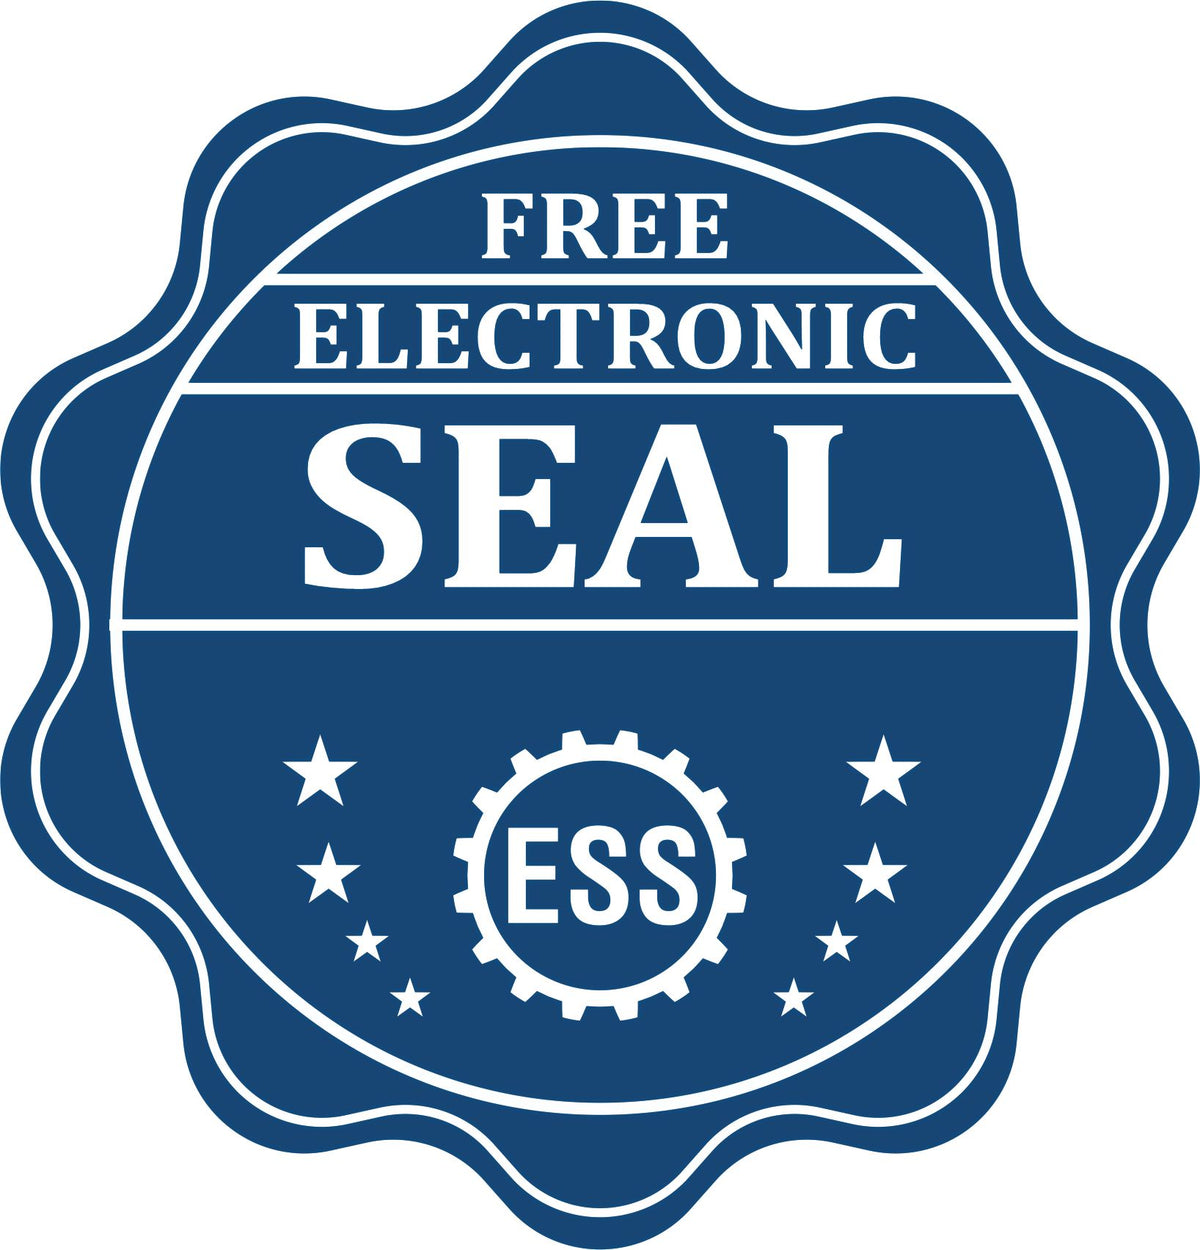 A badge showing a free electronic seal for the Slim Pre-Inked New York Professional Engineer Seal Stamp with stars and the ESS gear on the emblem.